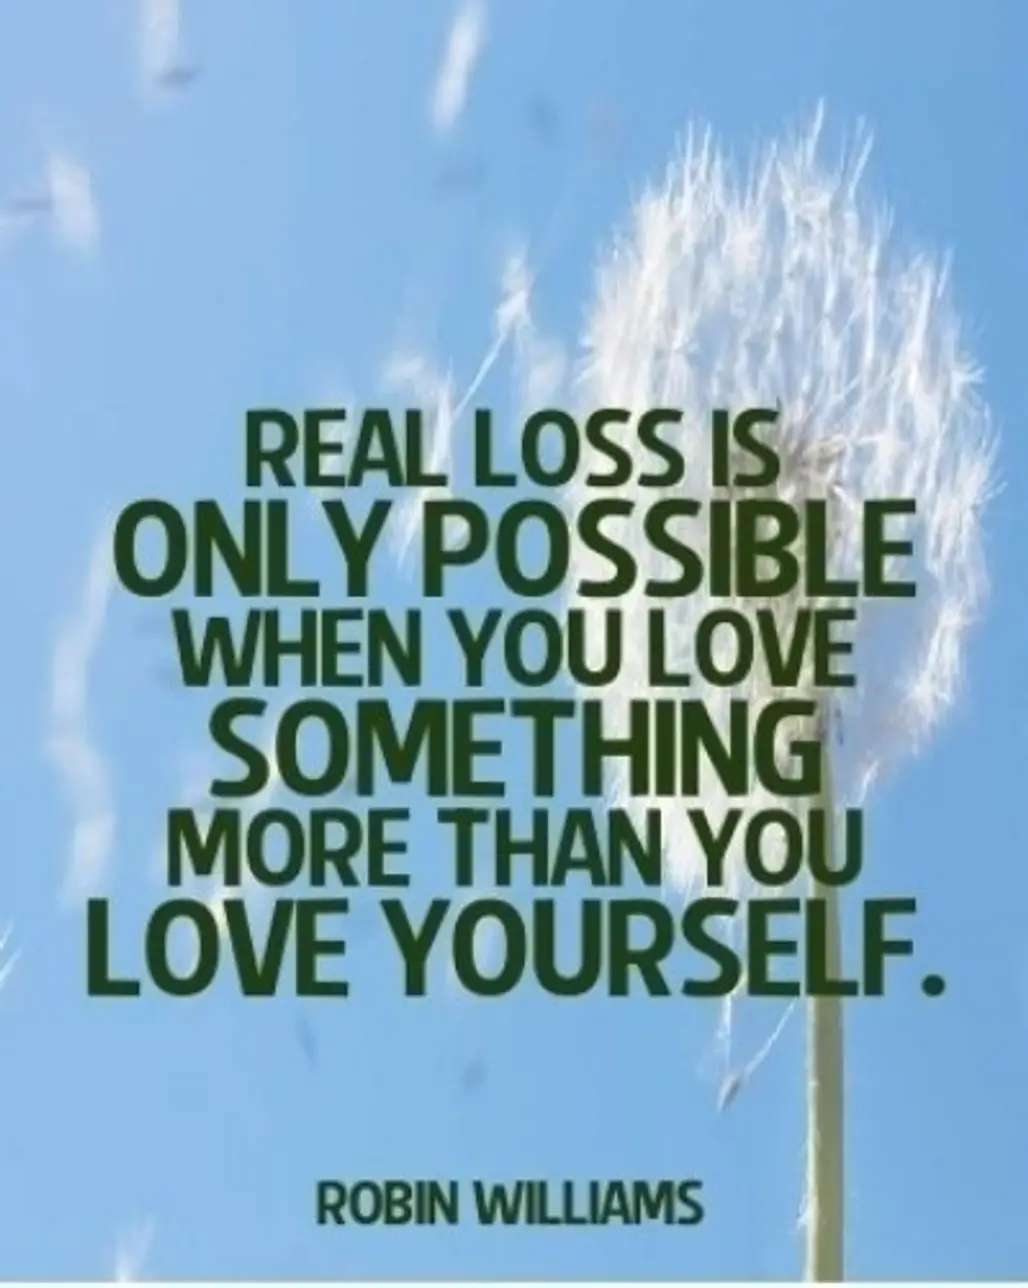 “Real Loss is Only Possible when You Love Something More than You Love Yourself.”